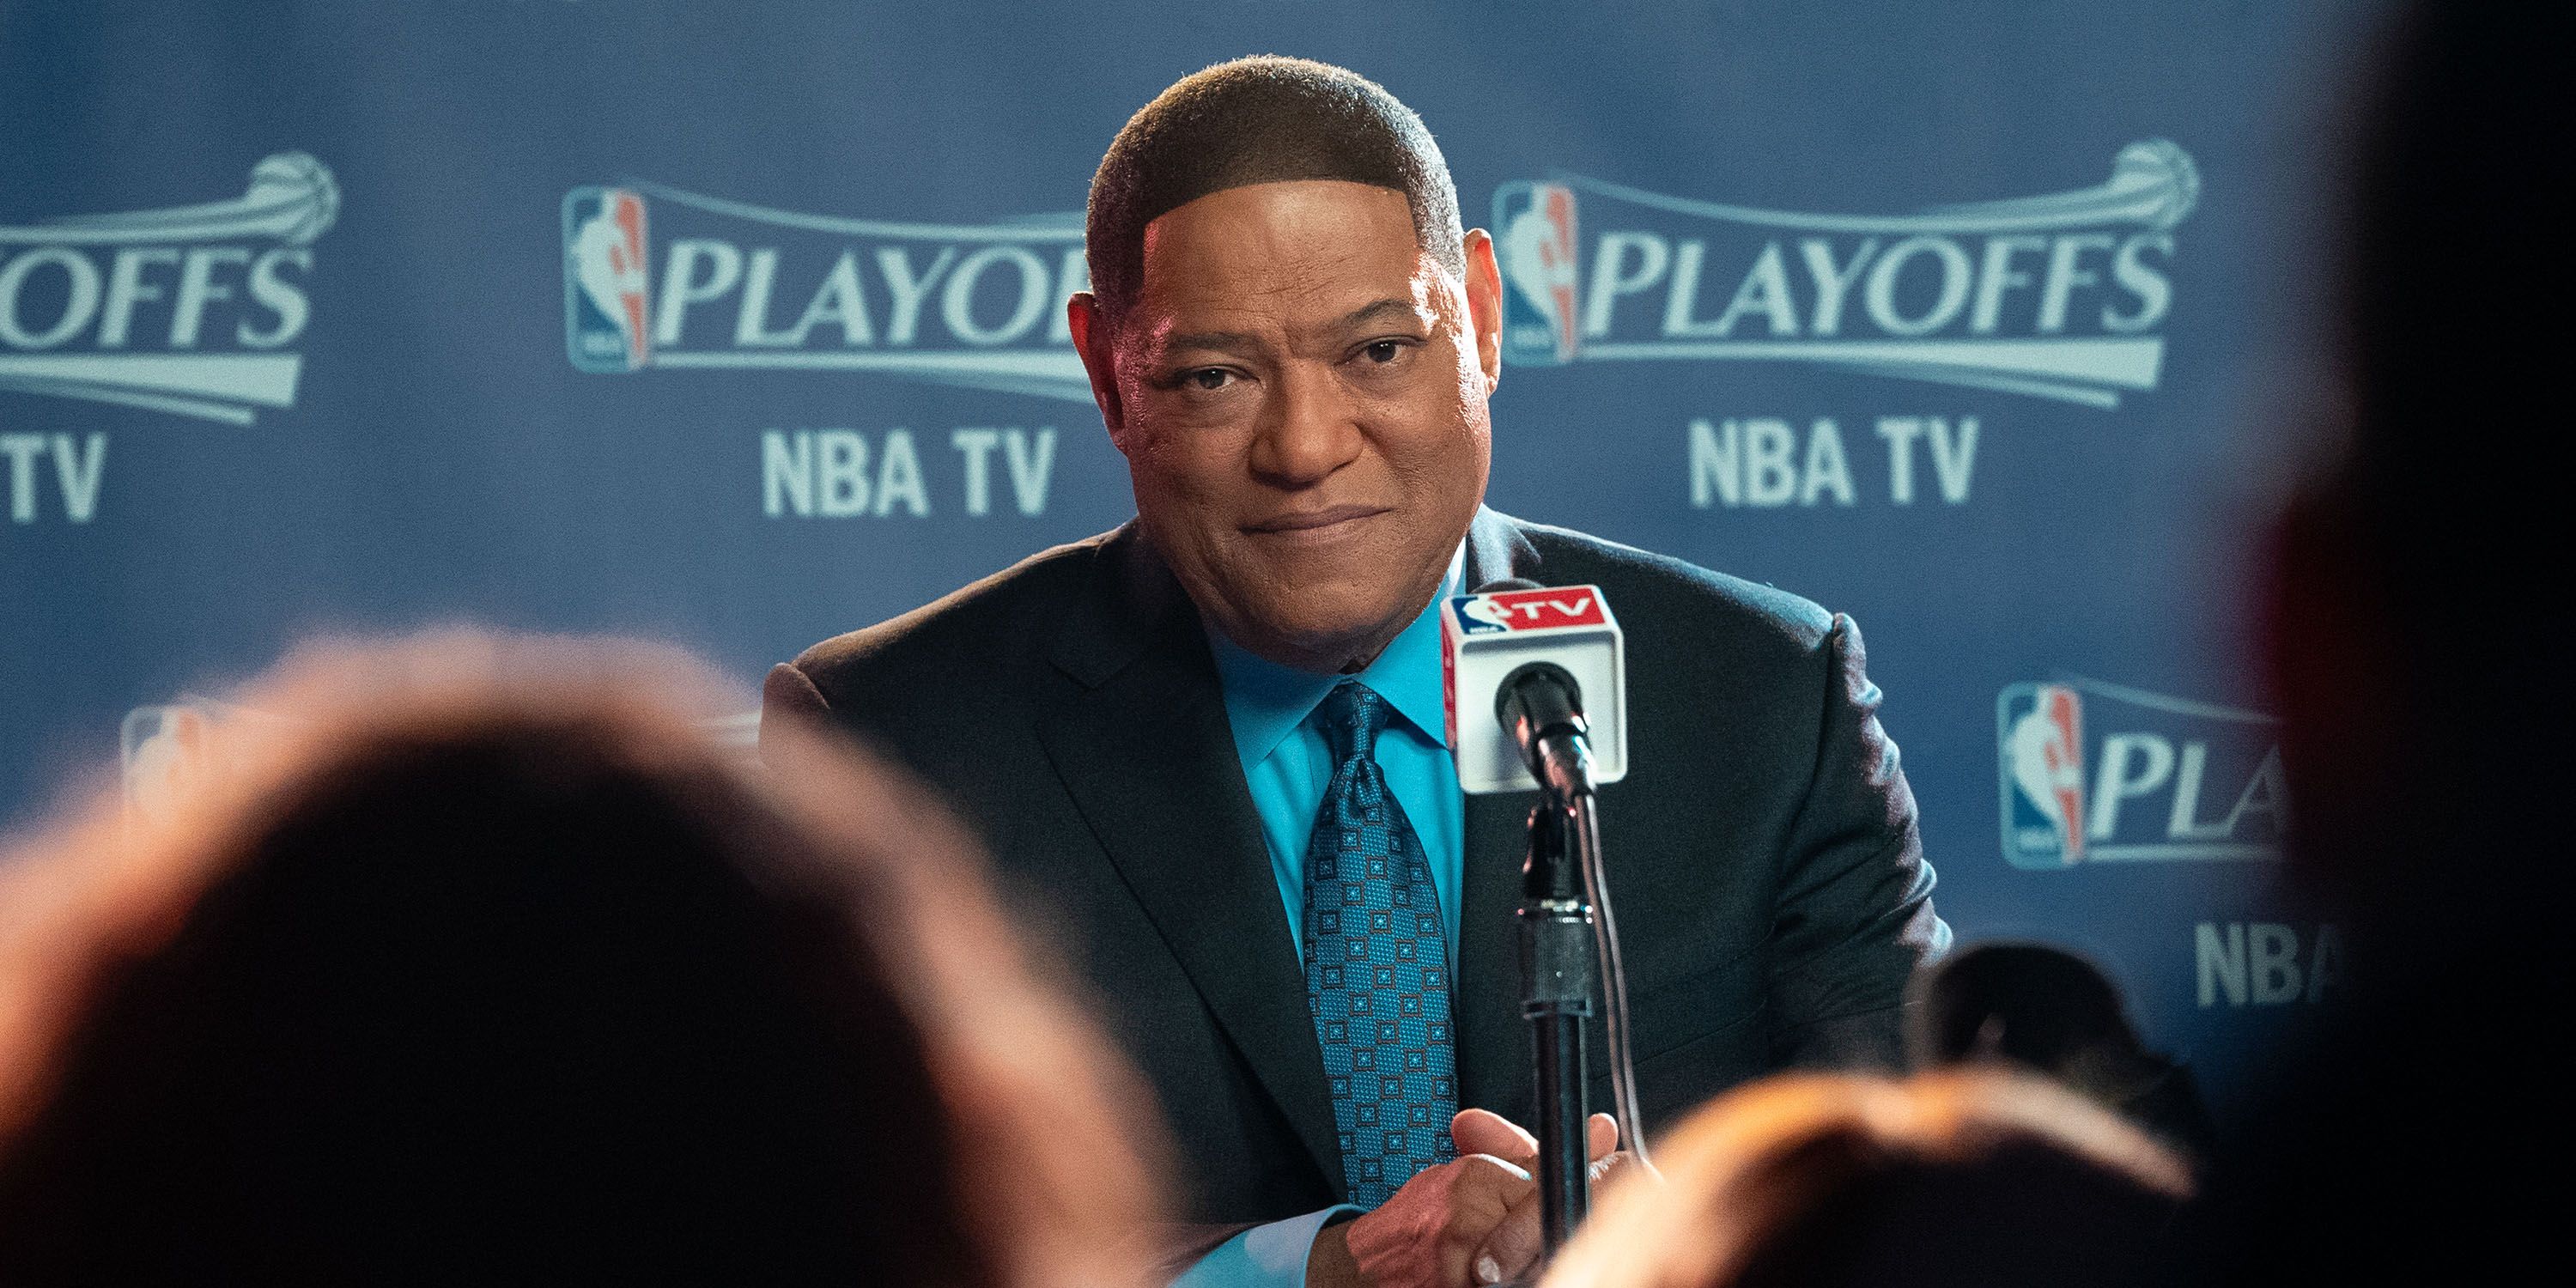 Laurence Fishburne as Doc Rivers at a press conference in Clipped.